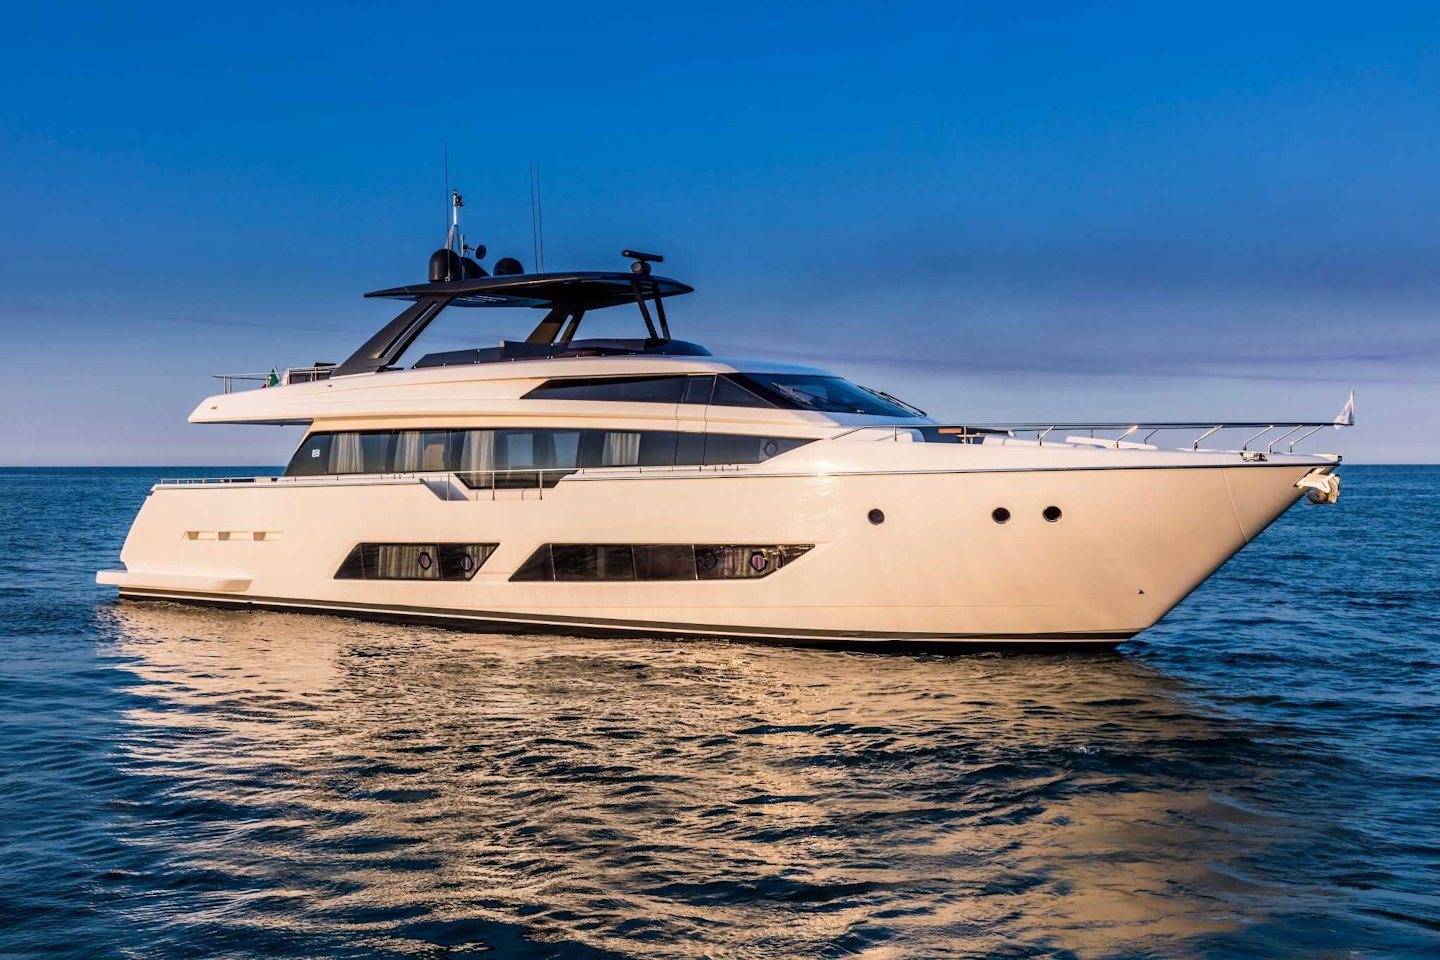 360 VR Virtual Tours of the Ferretti Yachts 850